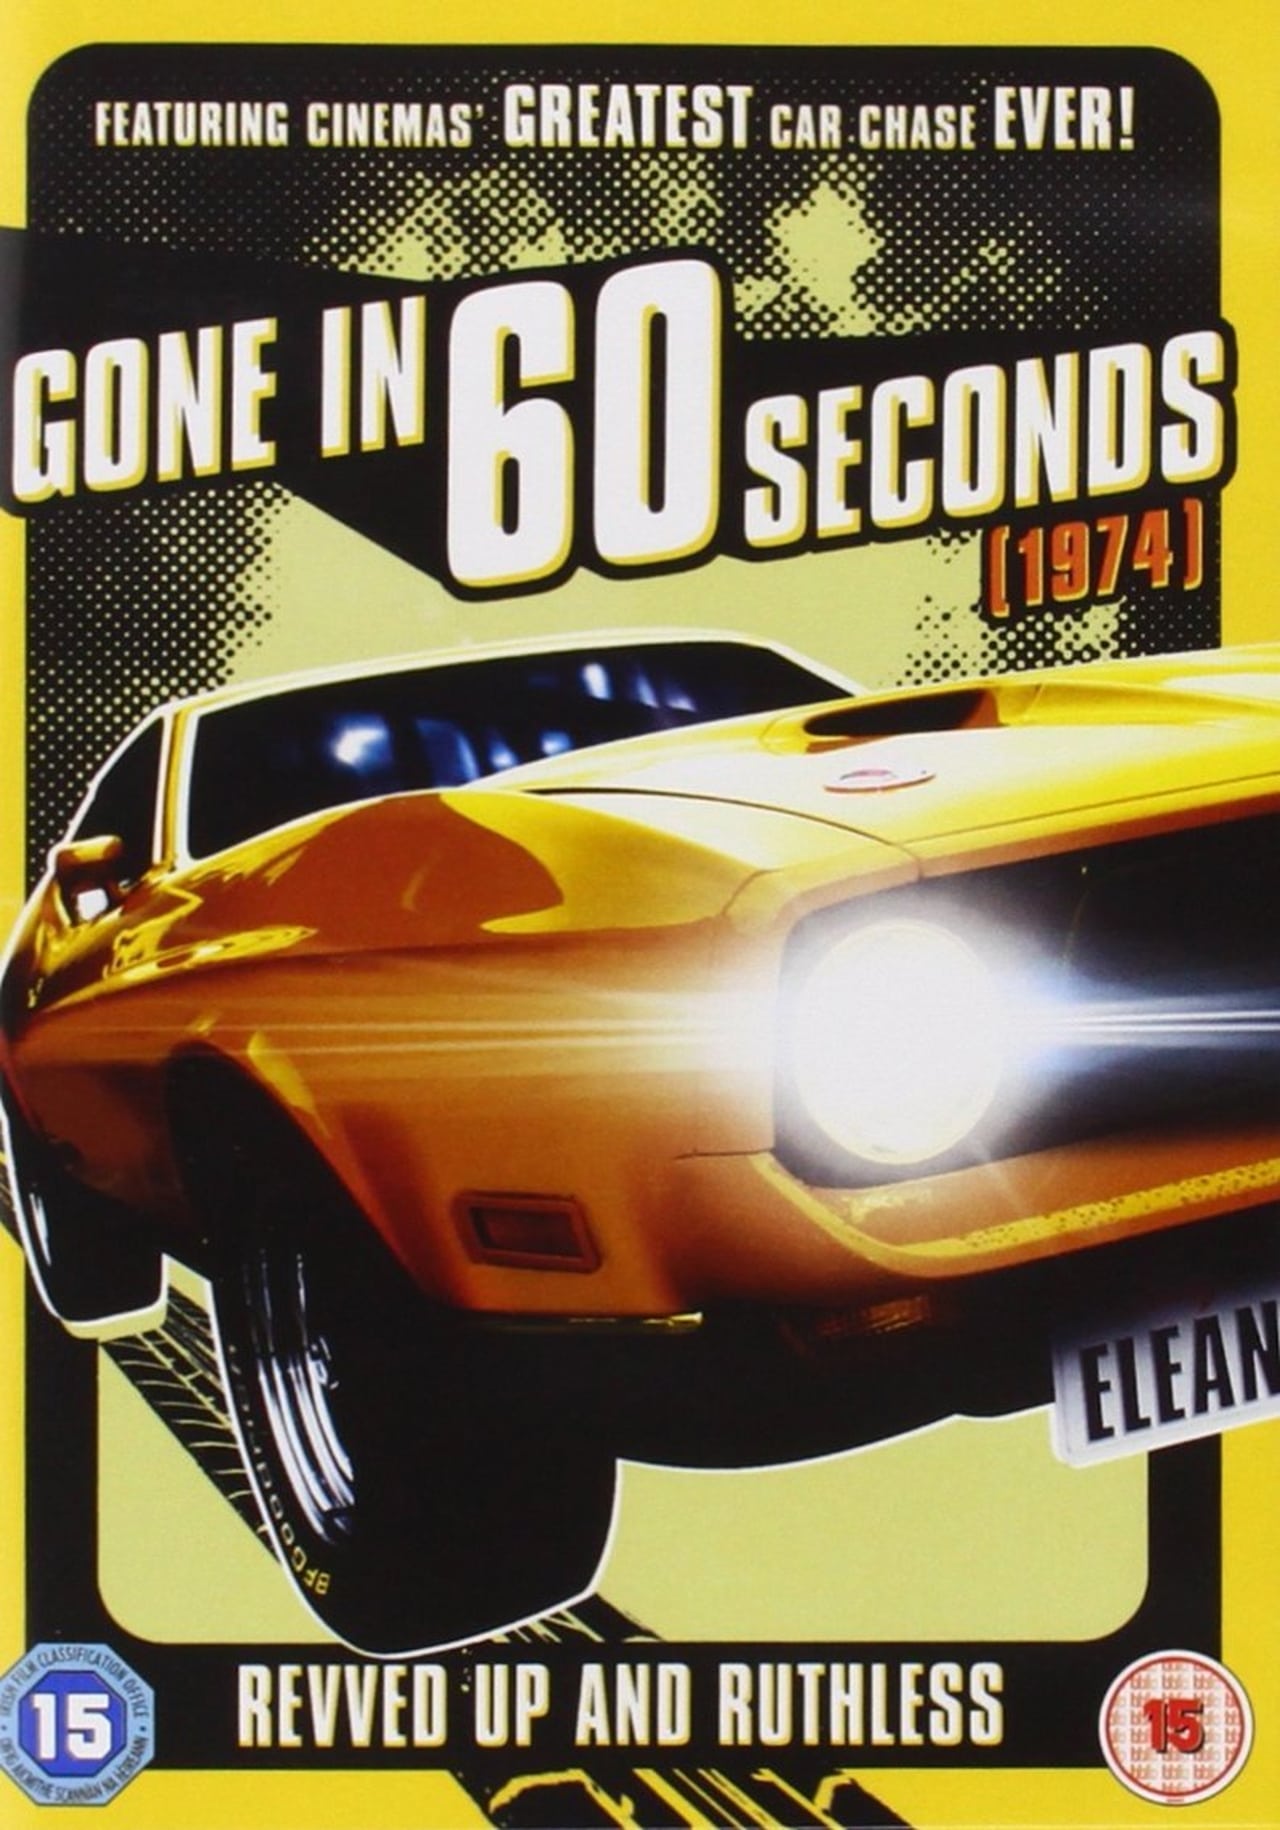 Gone In 60 Seconds wiki, synopsis, reviews, watch and download